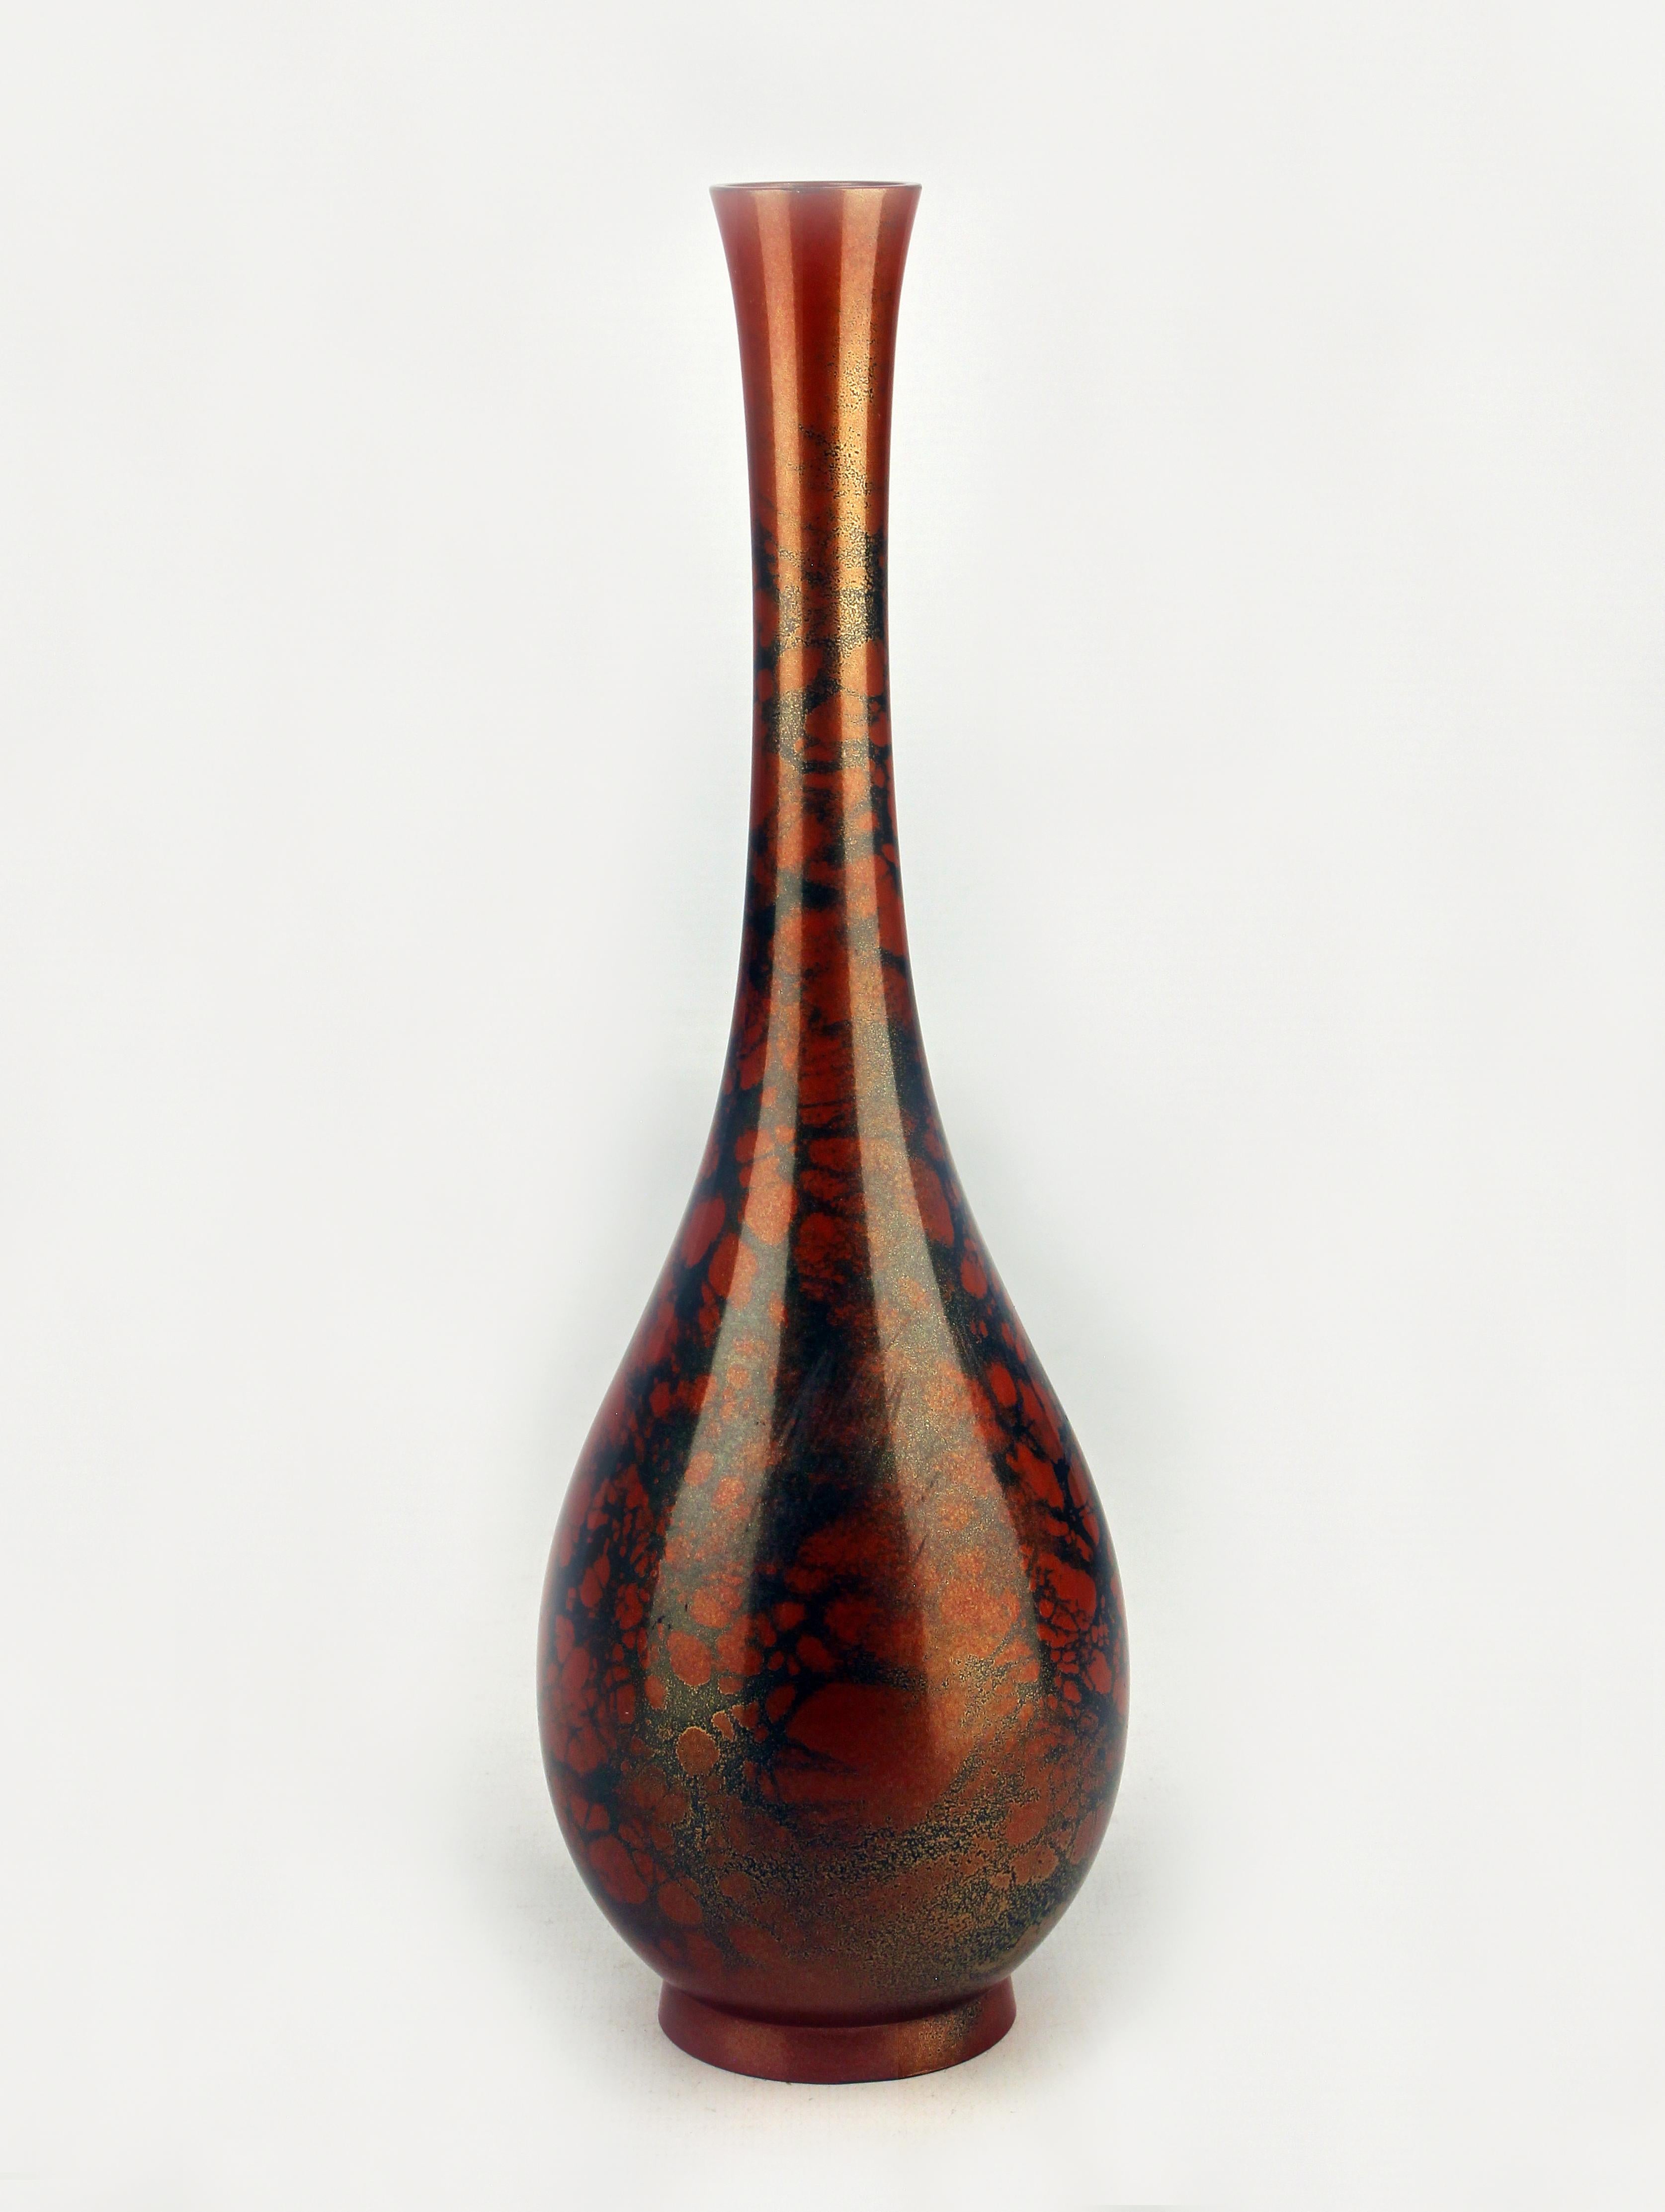 20th century/Shōwa period murashido patinated and polished bronze japanese vase

By: unknown
Material: bronze, copper, metal
Technique: murashido, cast, patinated, polished, metalwork
Dimensions: 4 in x 11 in
Date: 20th century
Style: Shōwa
Place of